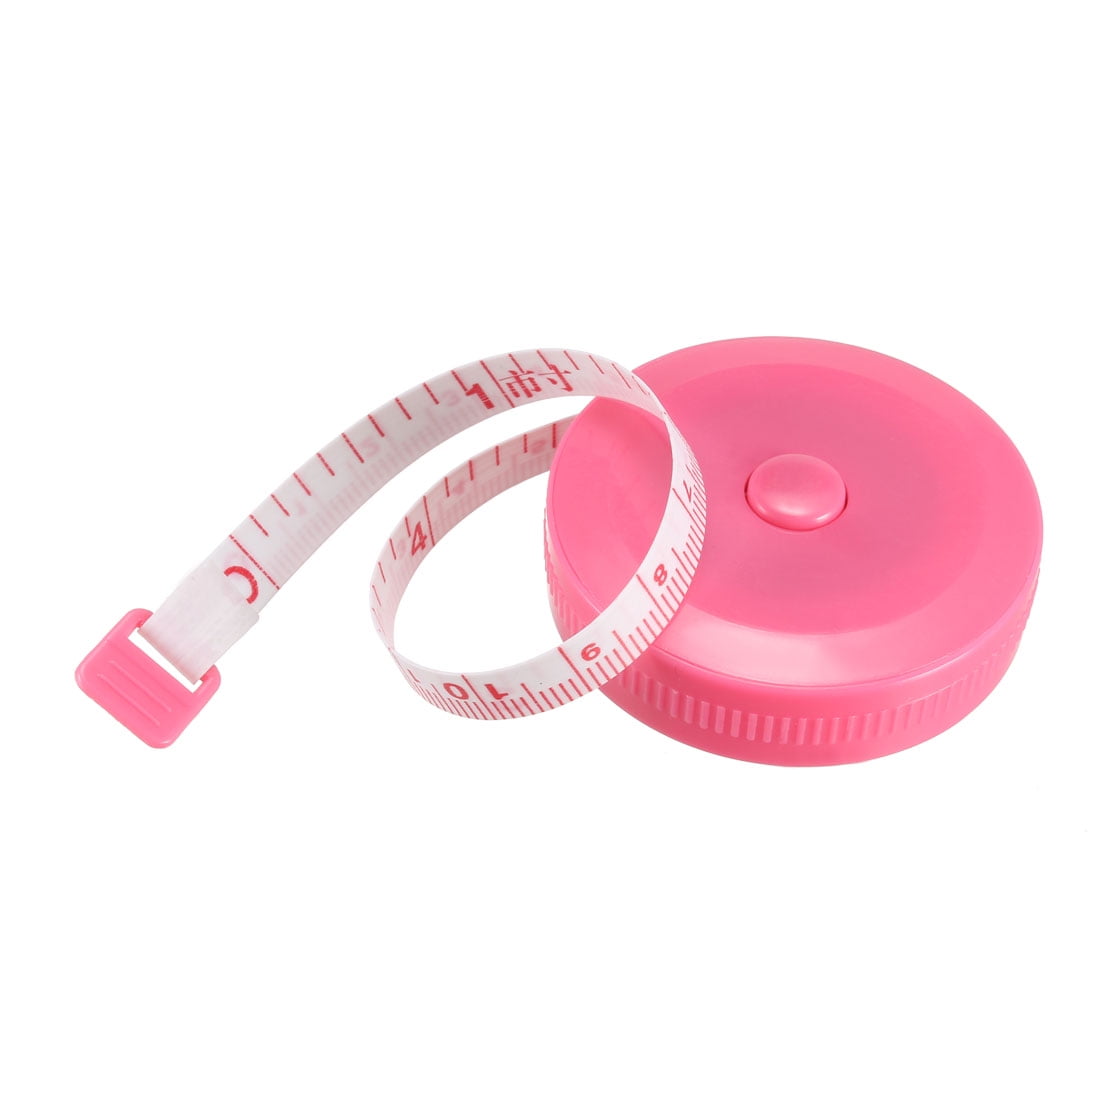 Wintape 3m Pink Clothing Tape Measure Dual Scales Long Soft Vinyl Material